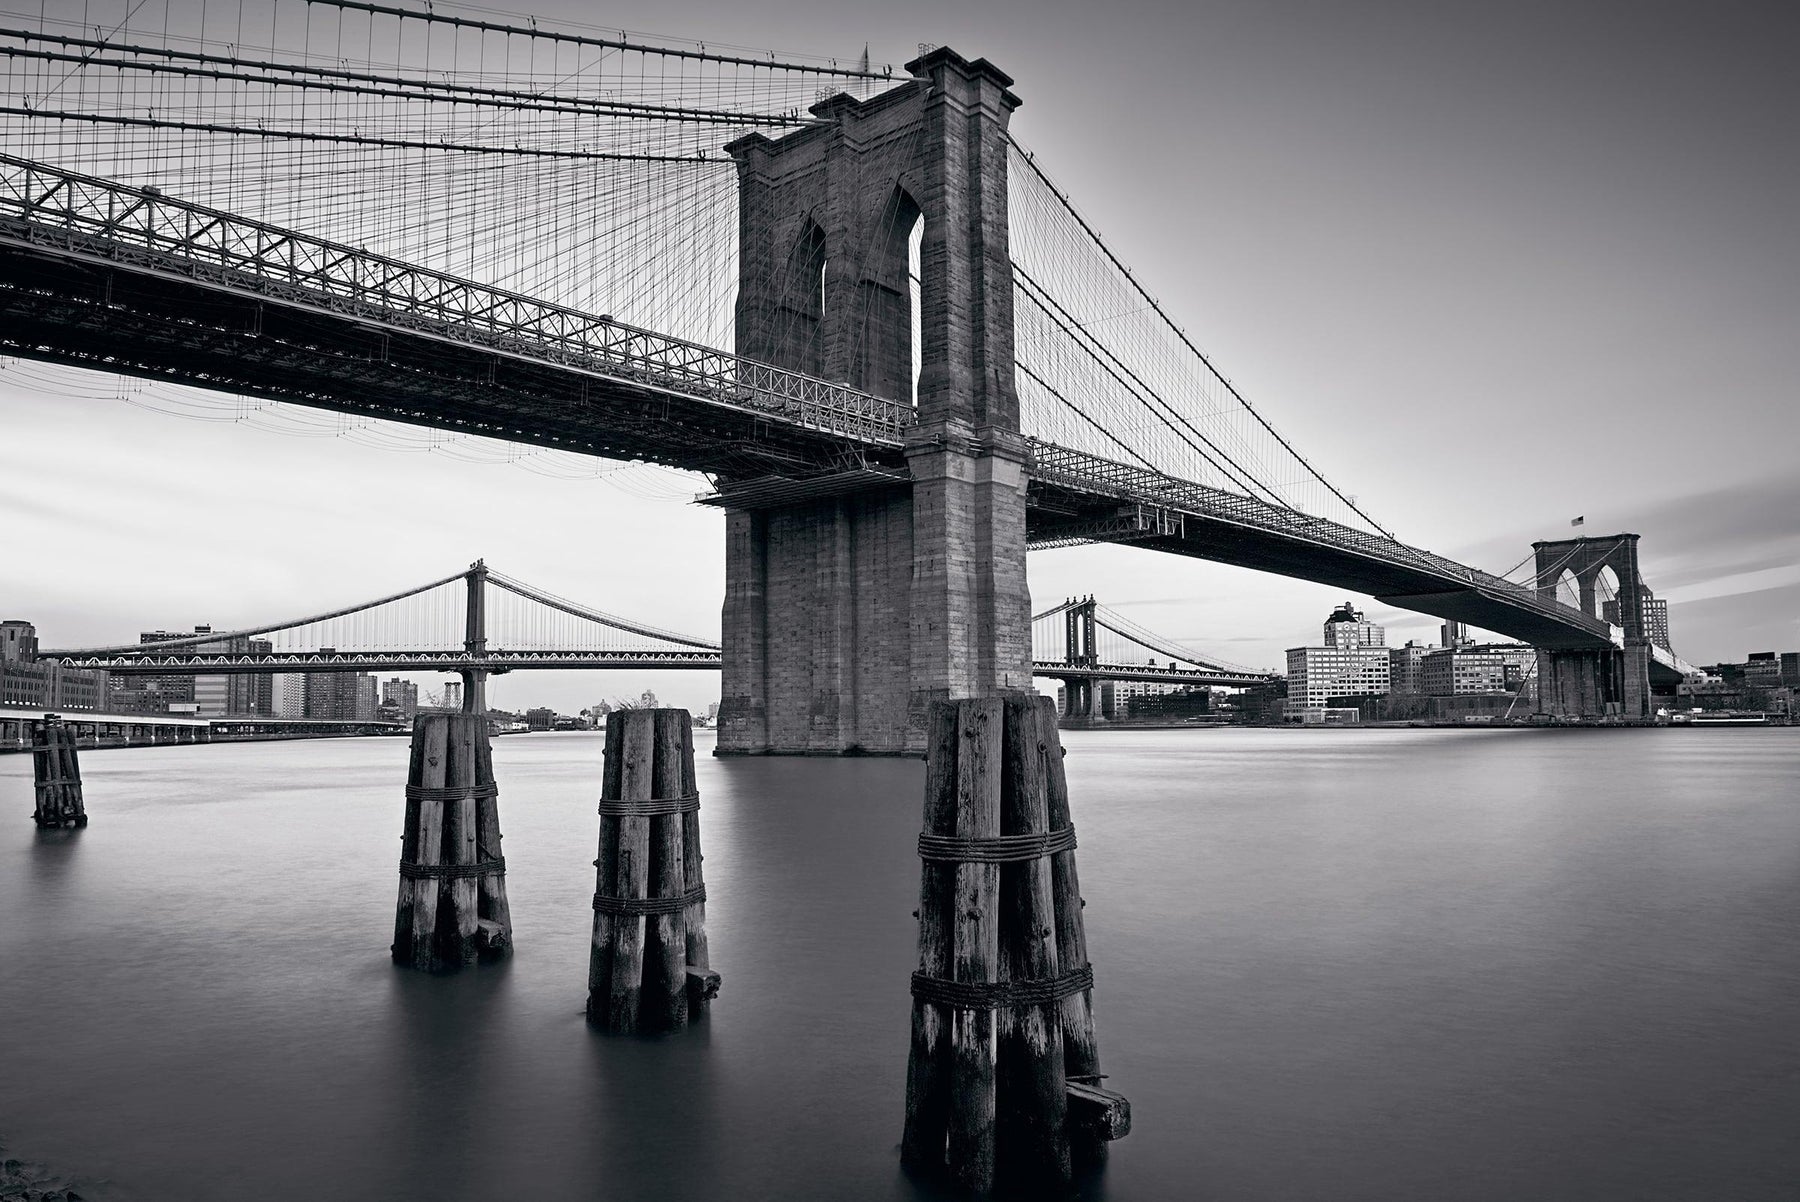 Black and white Brooklyn Bridge from the waters edge with the Manhattan Bridge and New York City in the background